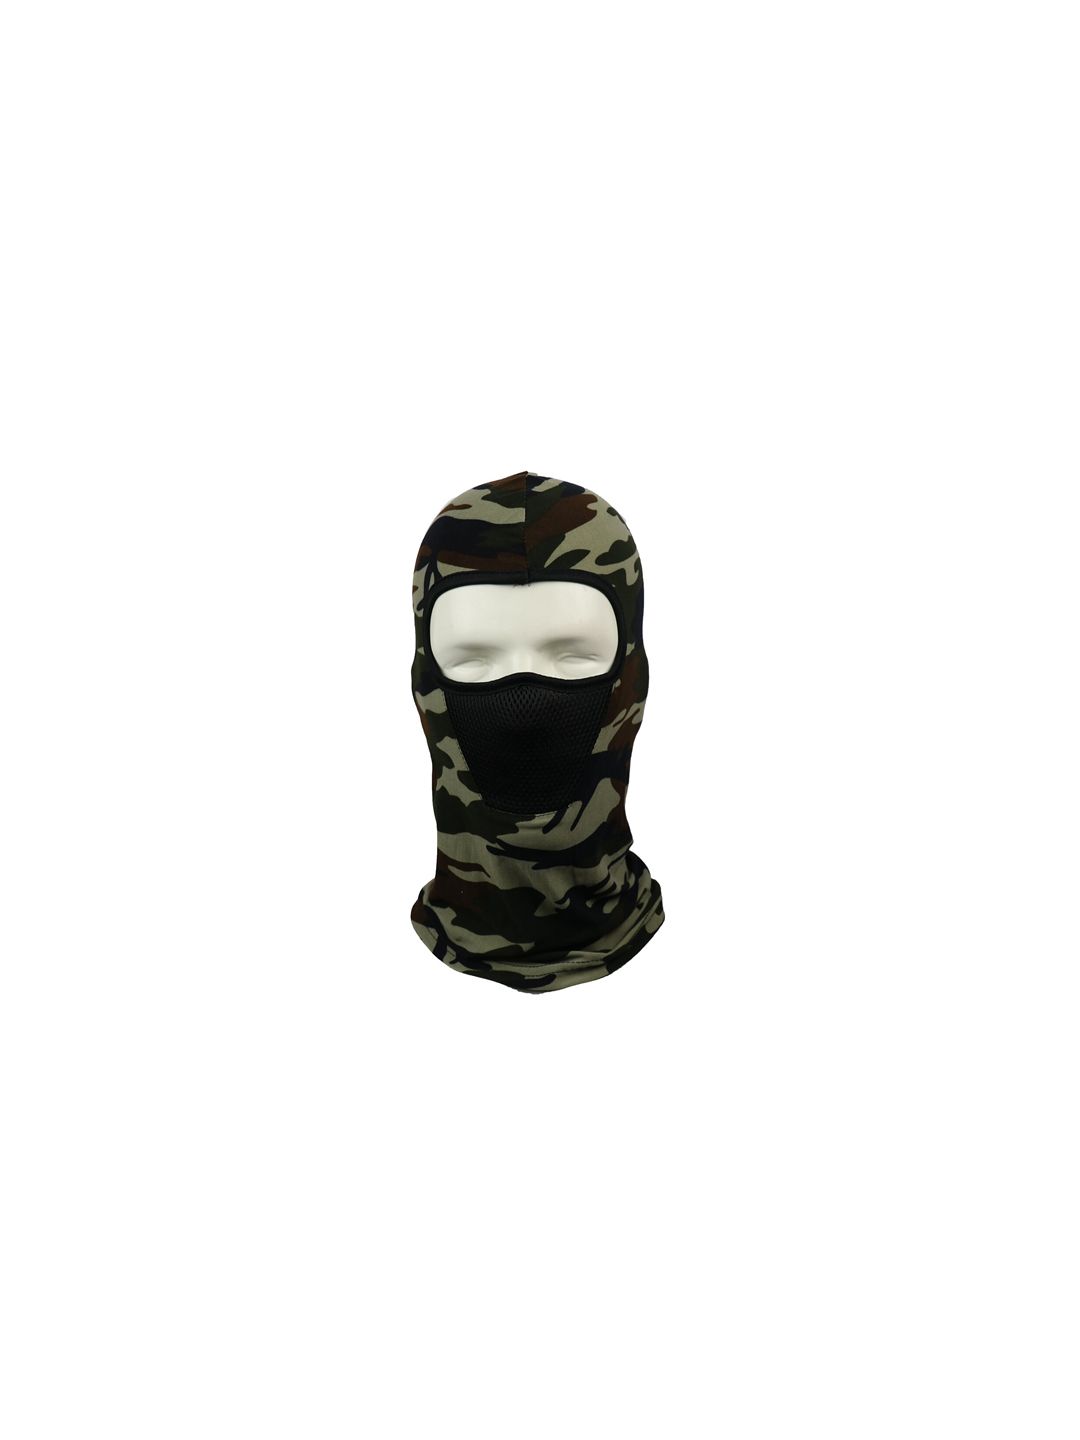 iSWEVEN Unisex Green & Brown Camouflage Printed Balaclavas Mask Price in India